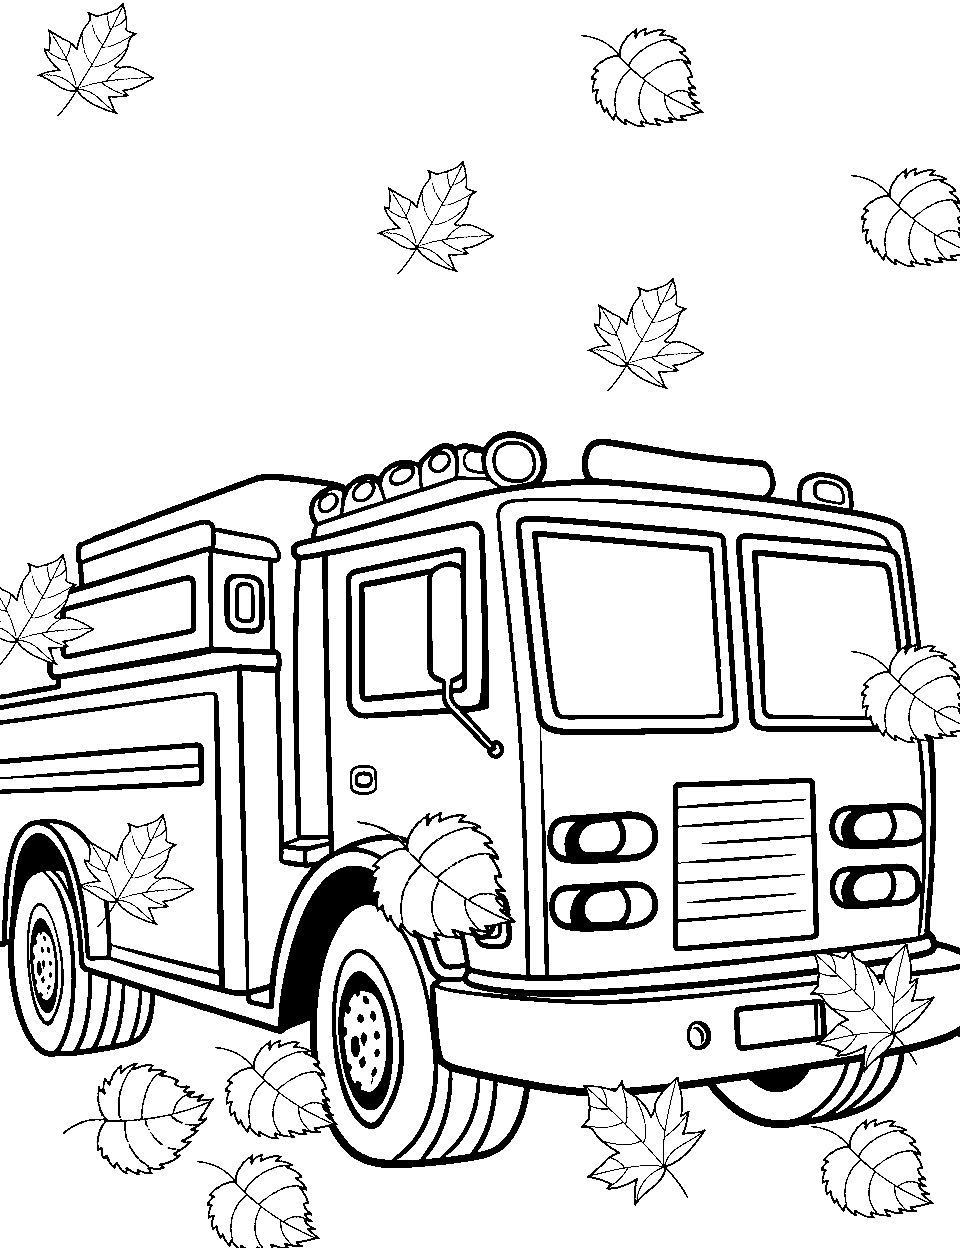 Fall Fire Truck Coloring Page - A fire truck surrounded by colorful fall leaves.